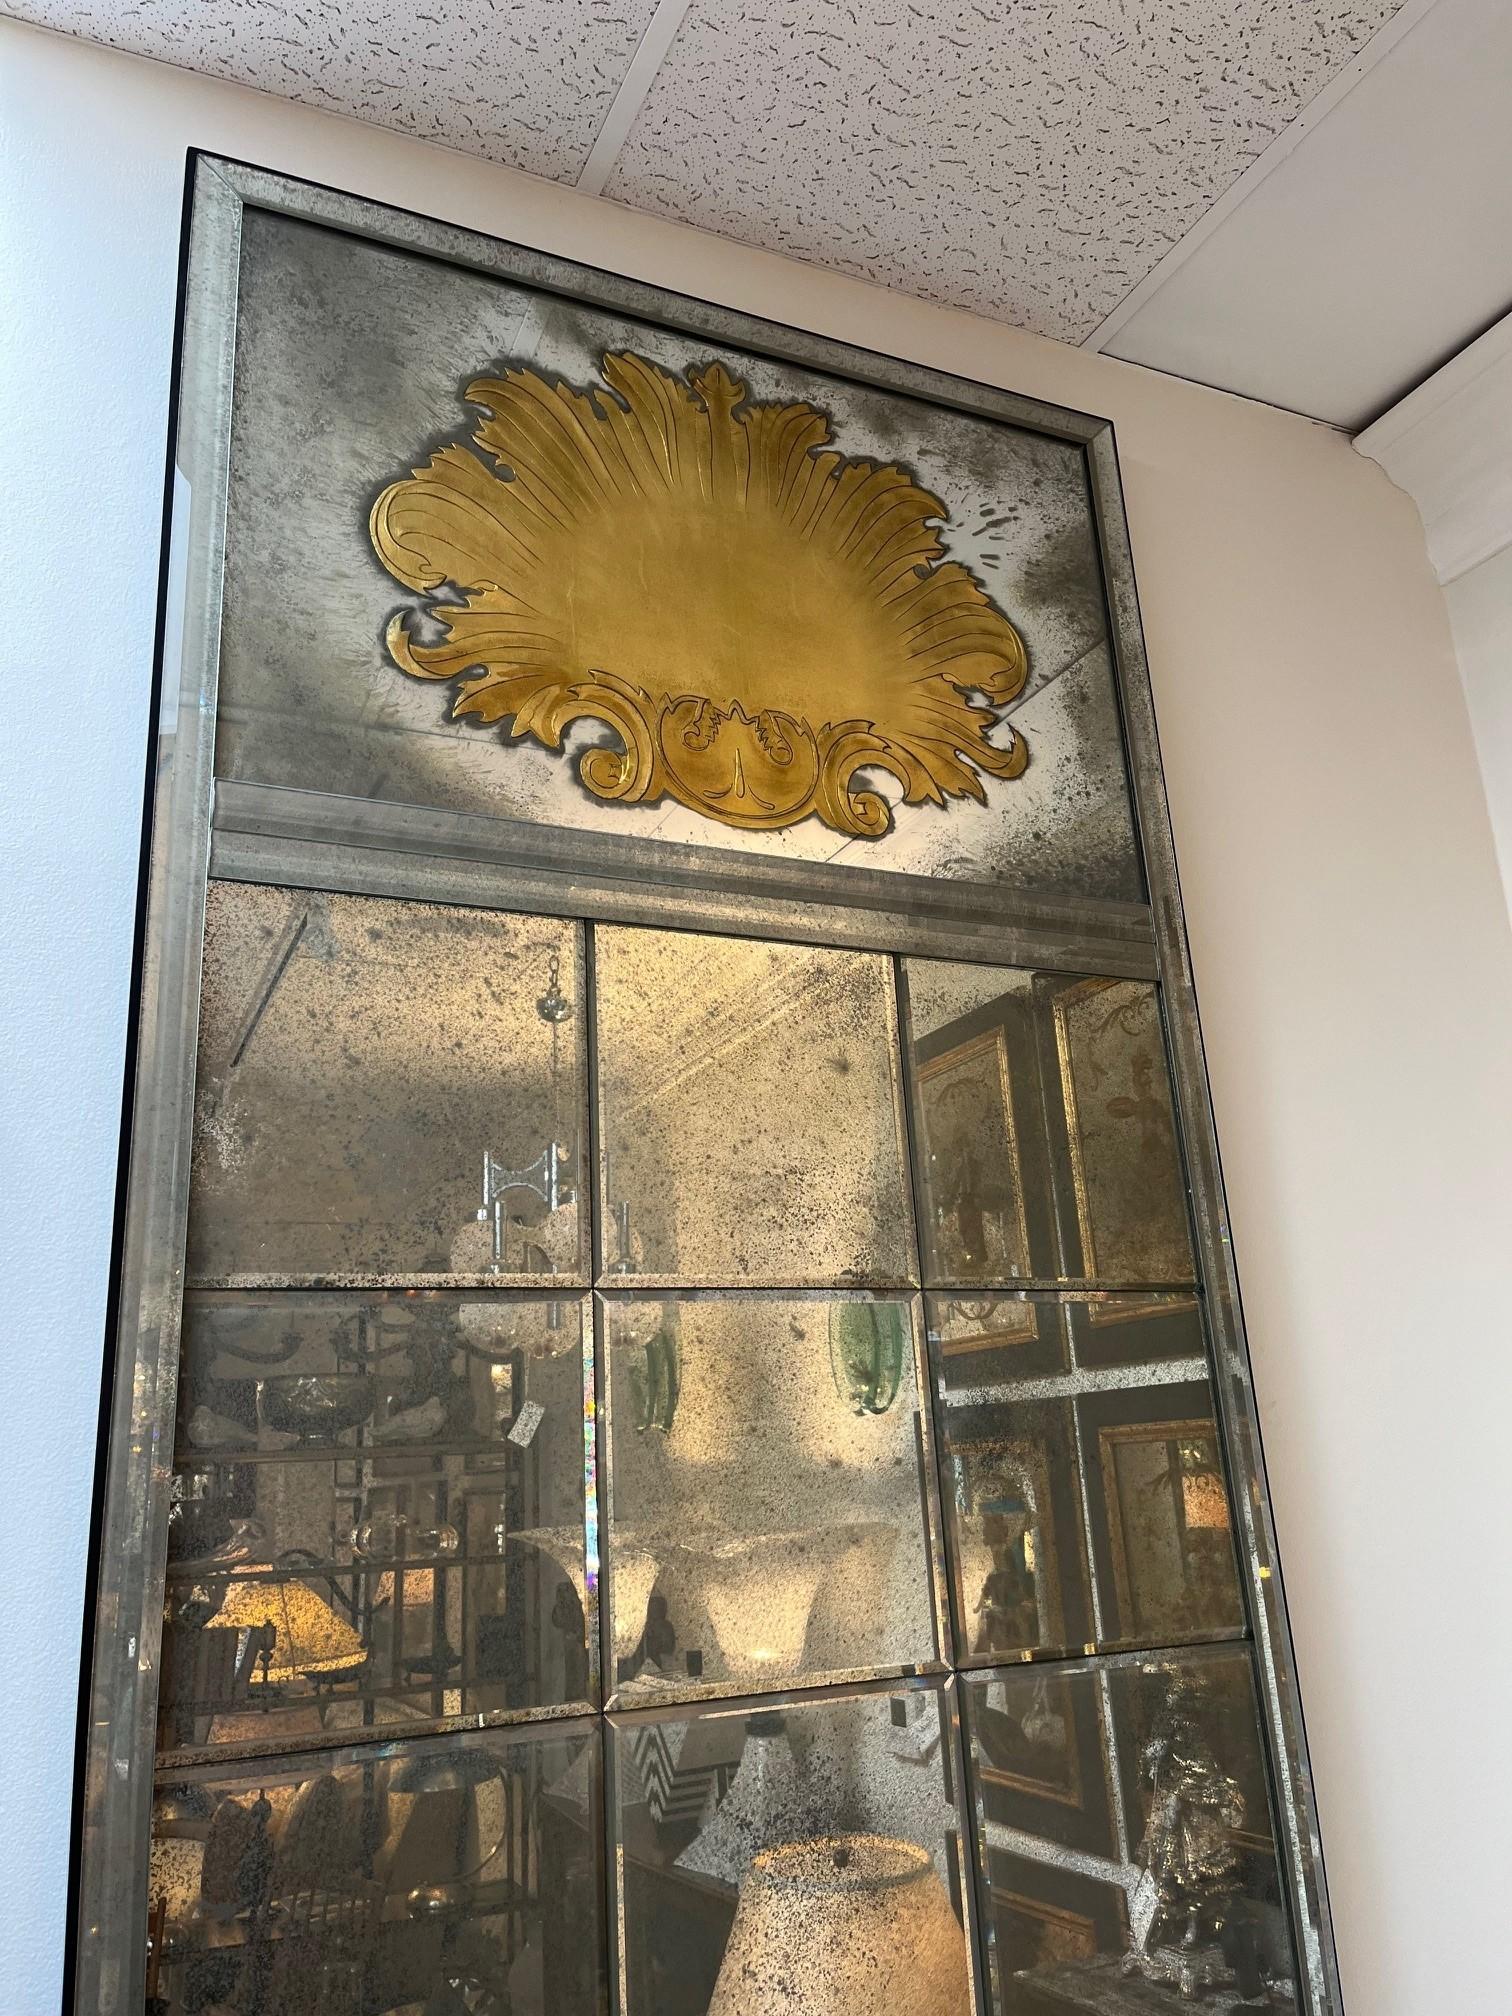 Made to Order Starburst Helena Mirror with Engraved Gilt Shell Motif at Top.  the Mirror has a Dozen Beveled Antiqued Mirror Panels, the Frame Solid Wood and Steel Frame make Hanging this Large Mirror easy and Secure. This a Showroom Model, 
we have